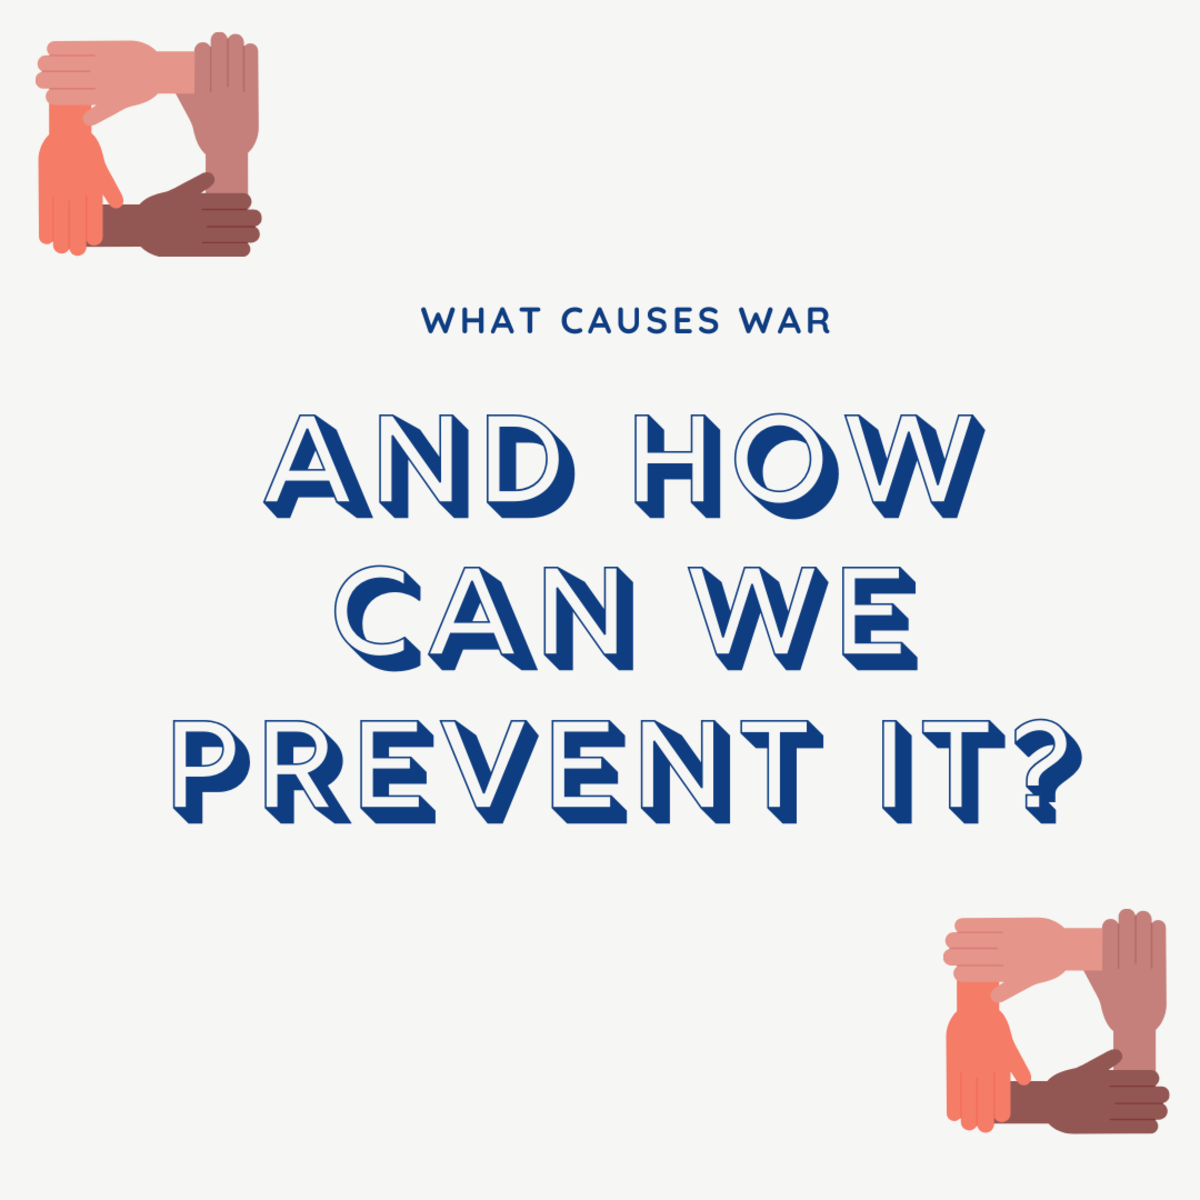 Wars: Causes, Aftermath and Prevention